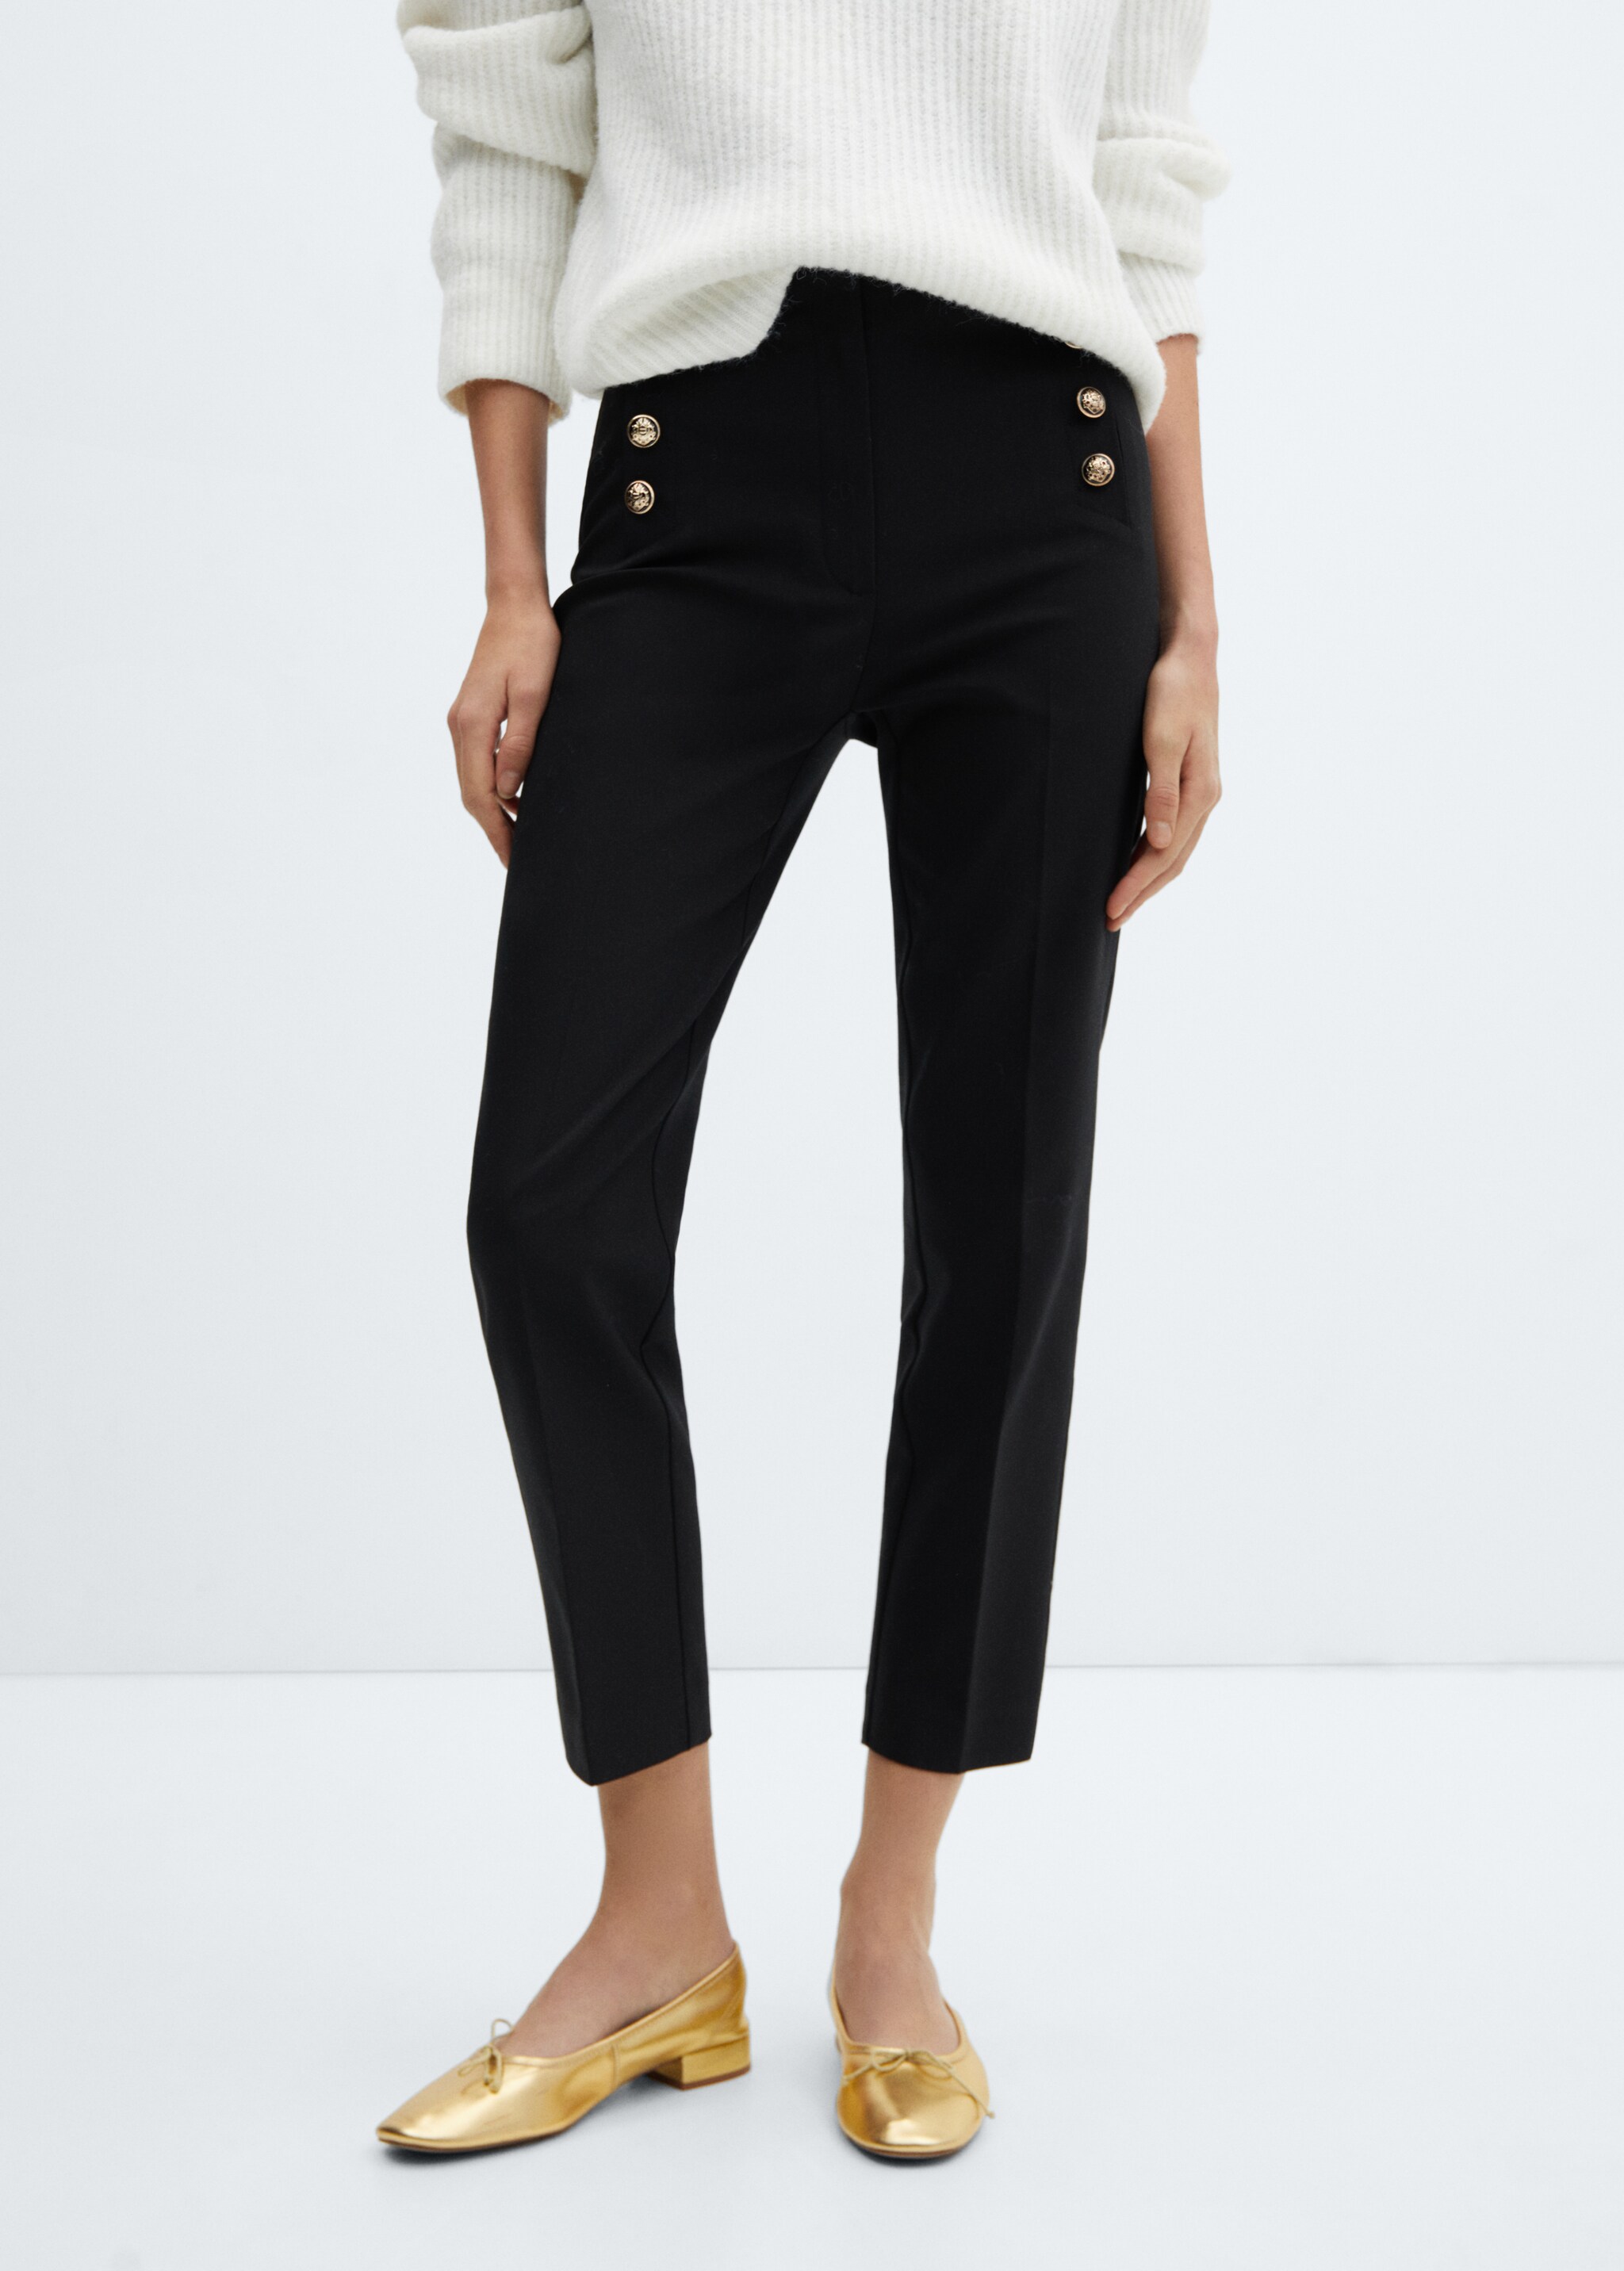 Cropped button trousers - Medium plane